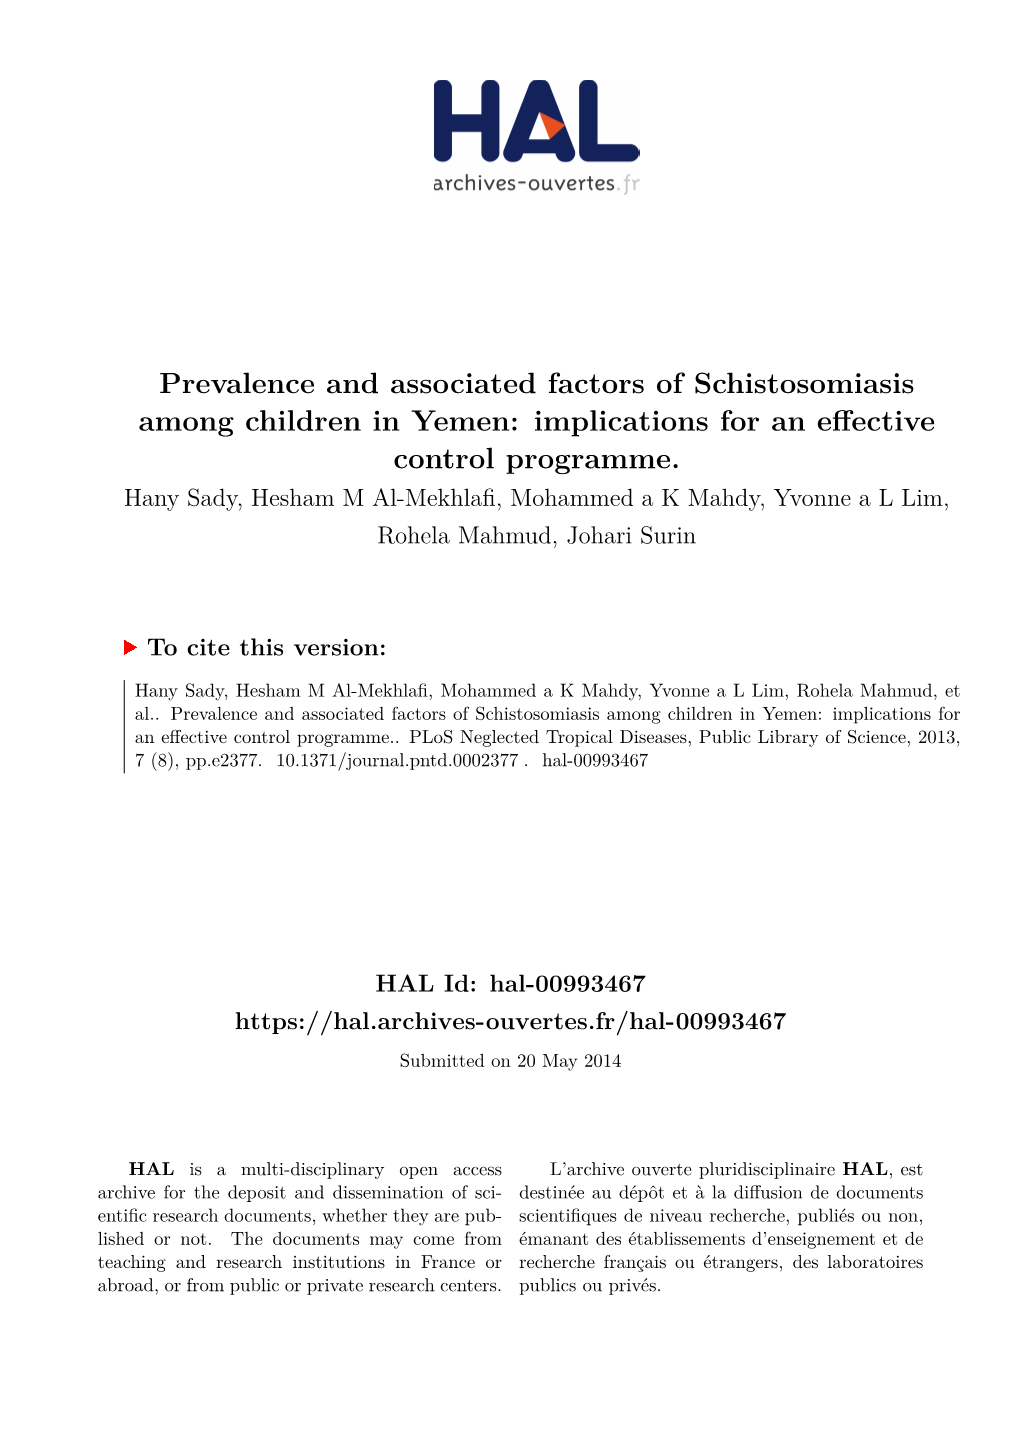 Prevalence and Associated Factors of Schistosomiasis Among Children in Yemen: Implications for an Effective Control Programme